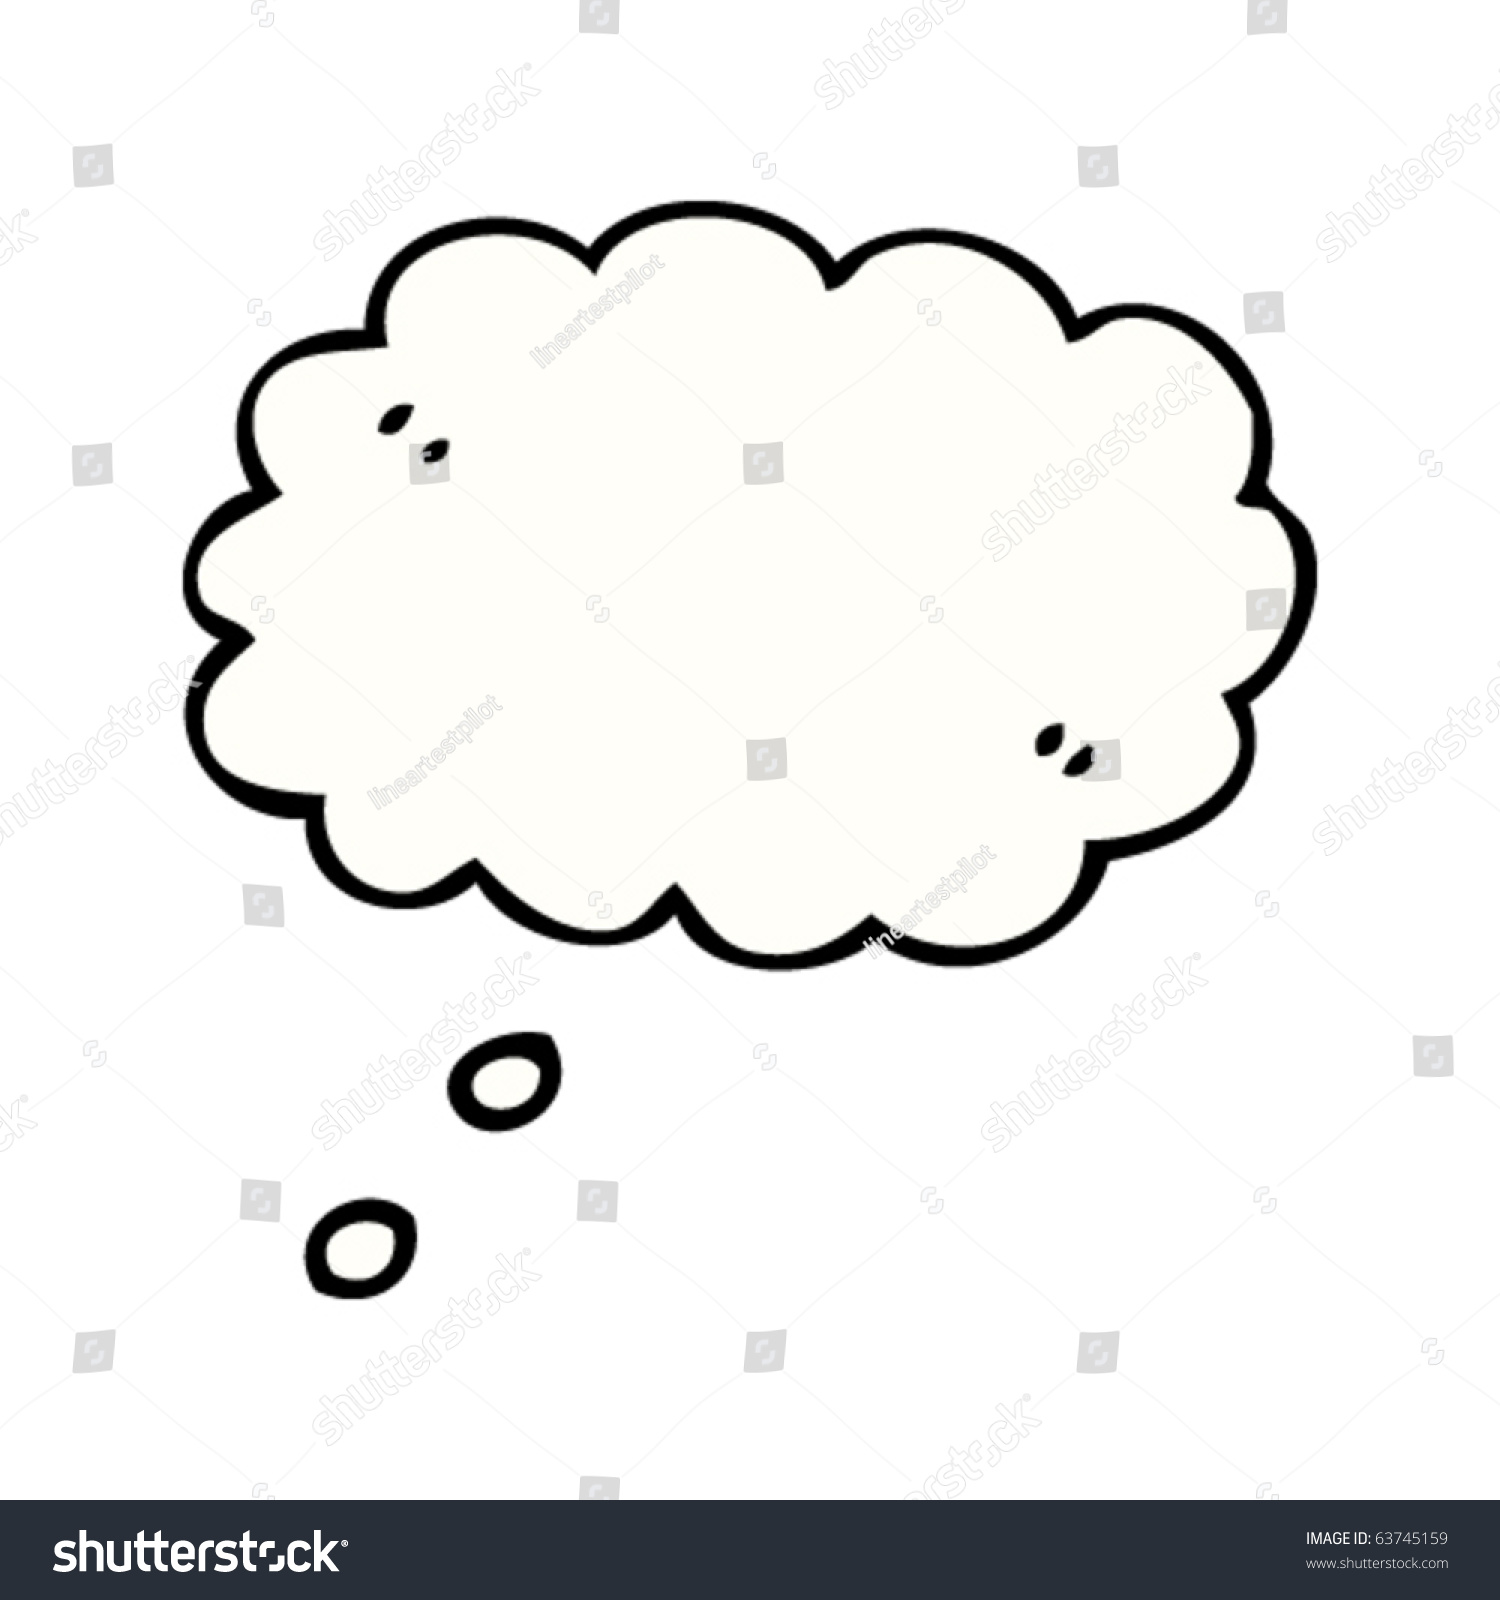 Thought Bubble Cartoon Stock Vector (Royalty Free) 63745159